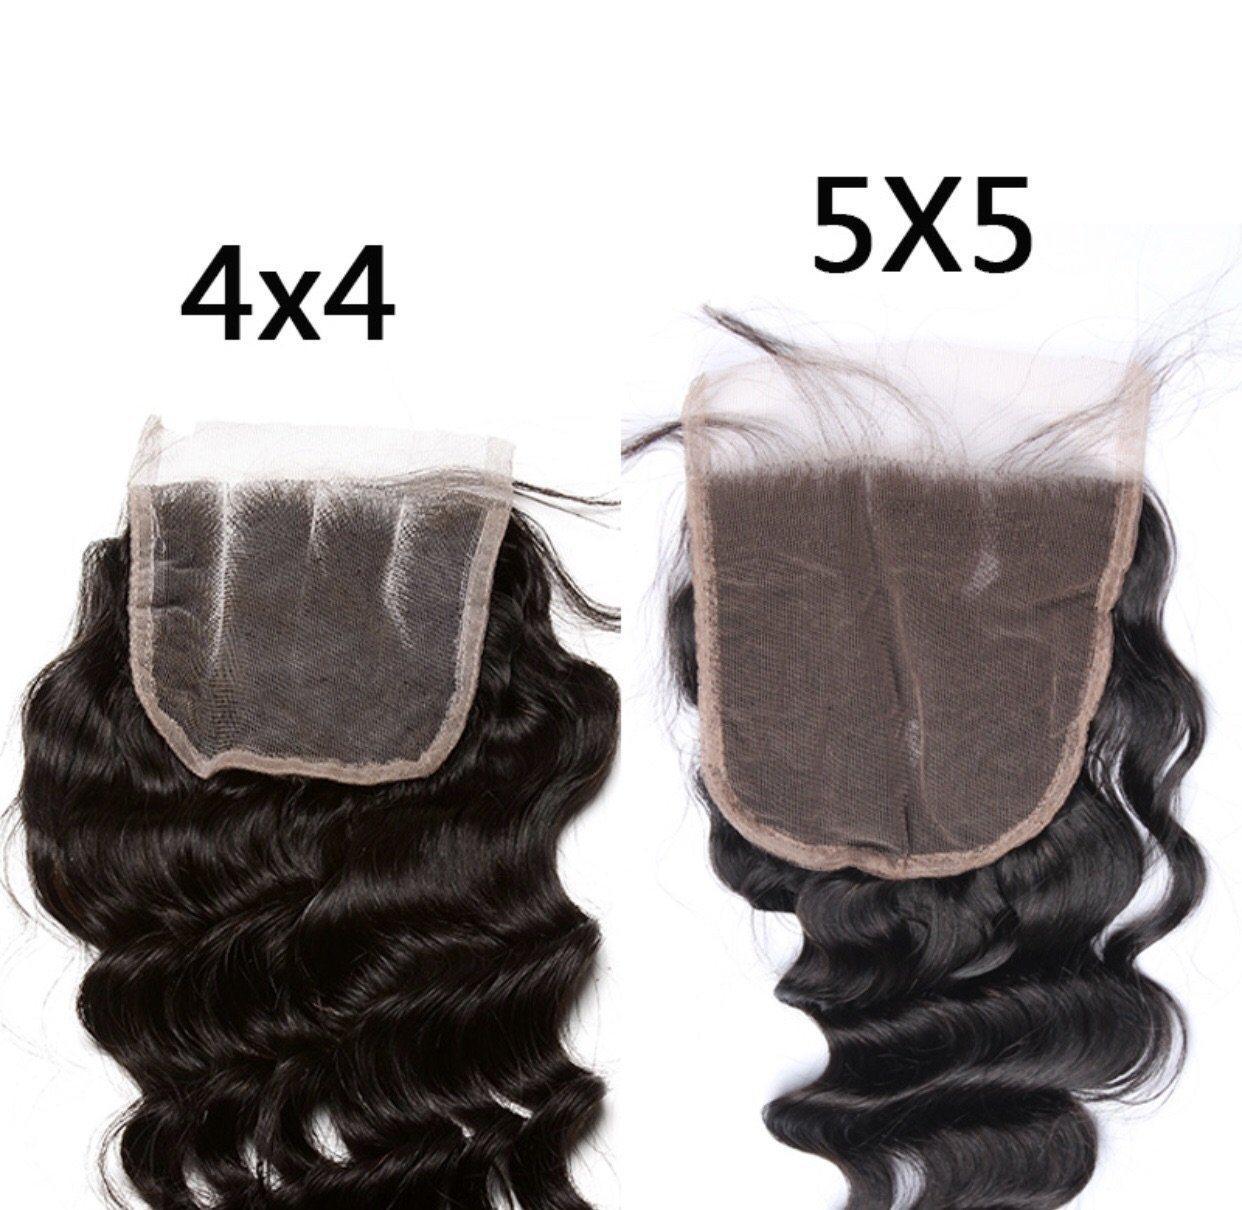 Versatile 5x5 HD Lace Closure - Invisible Blend for a Natural Look